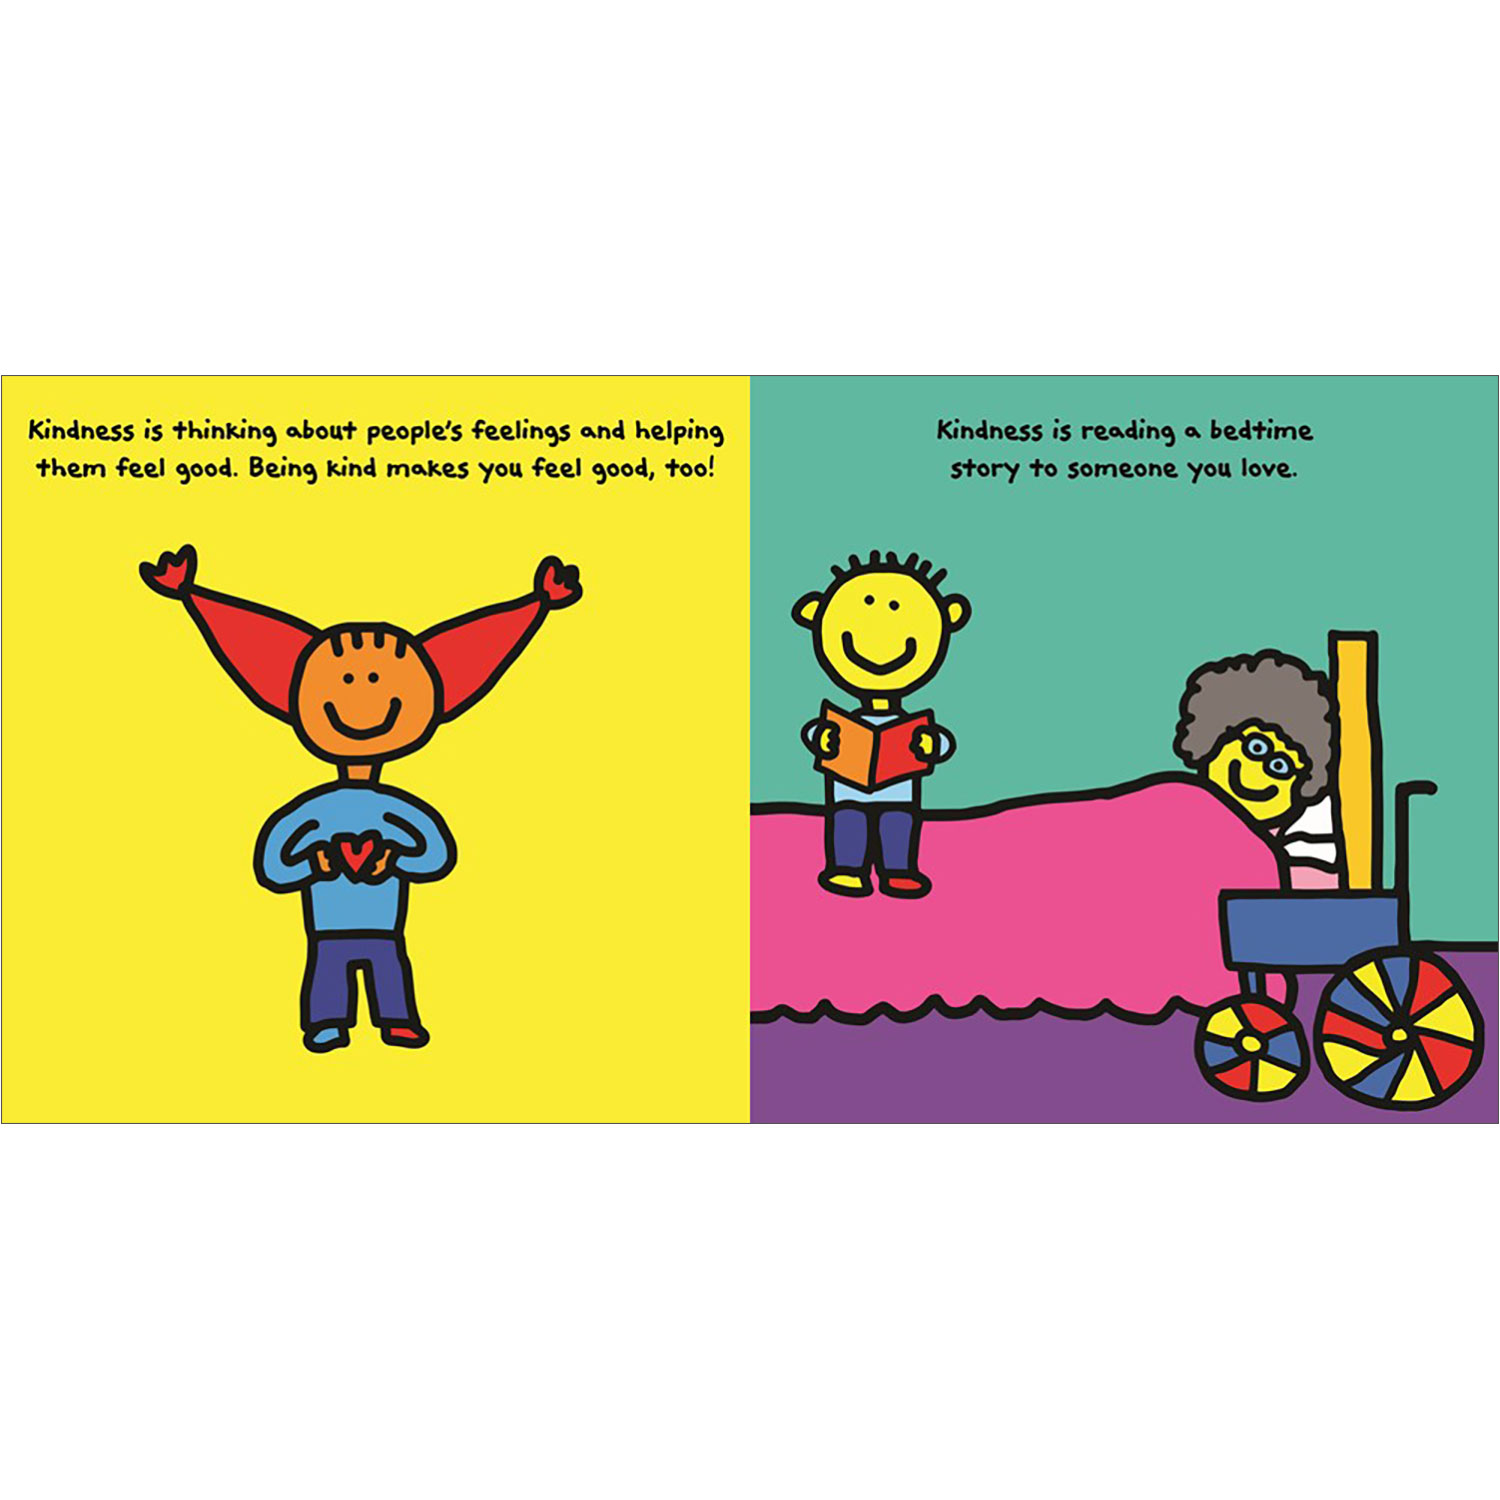 Todd Parr's Be Who You Are Book Set